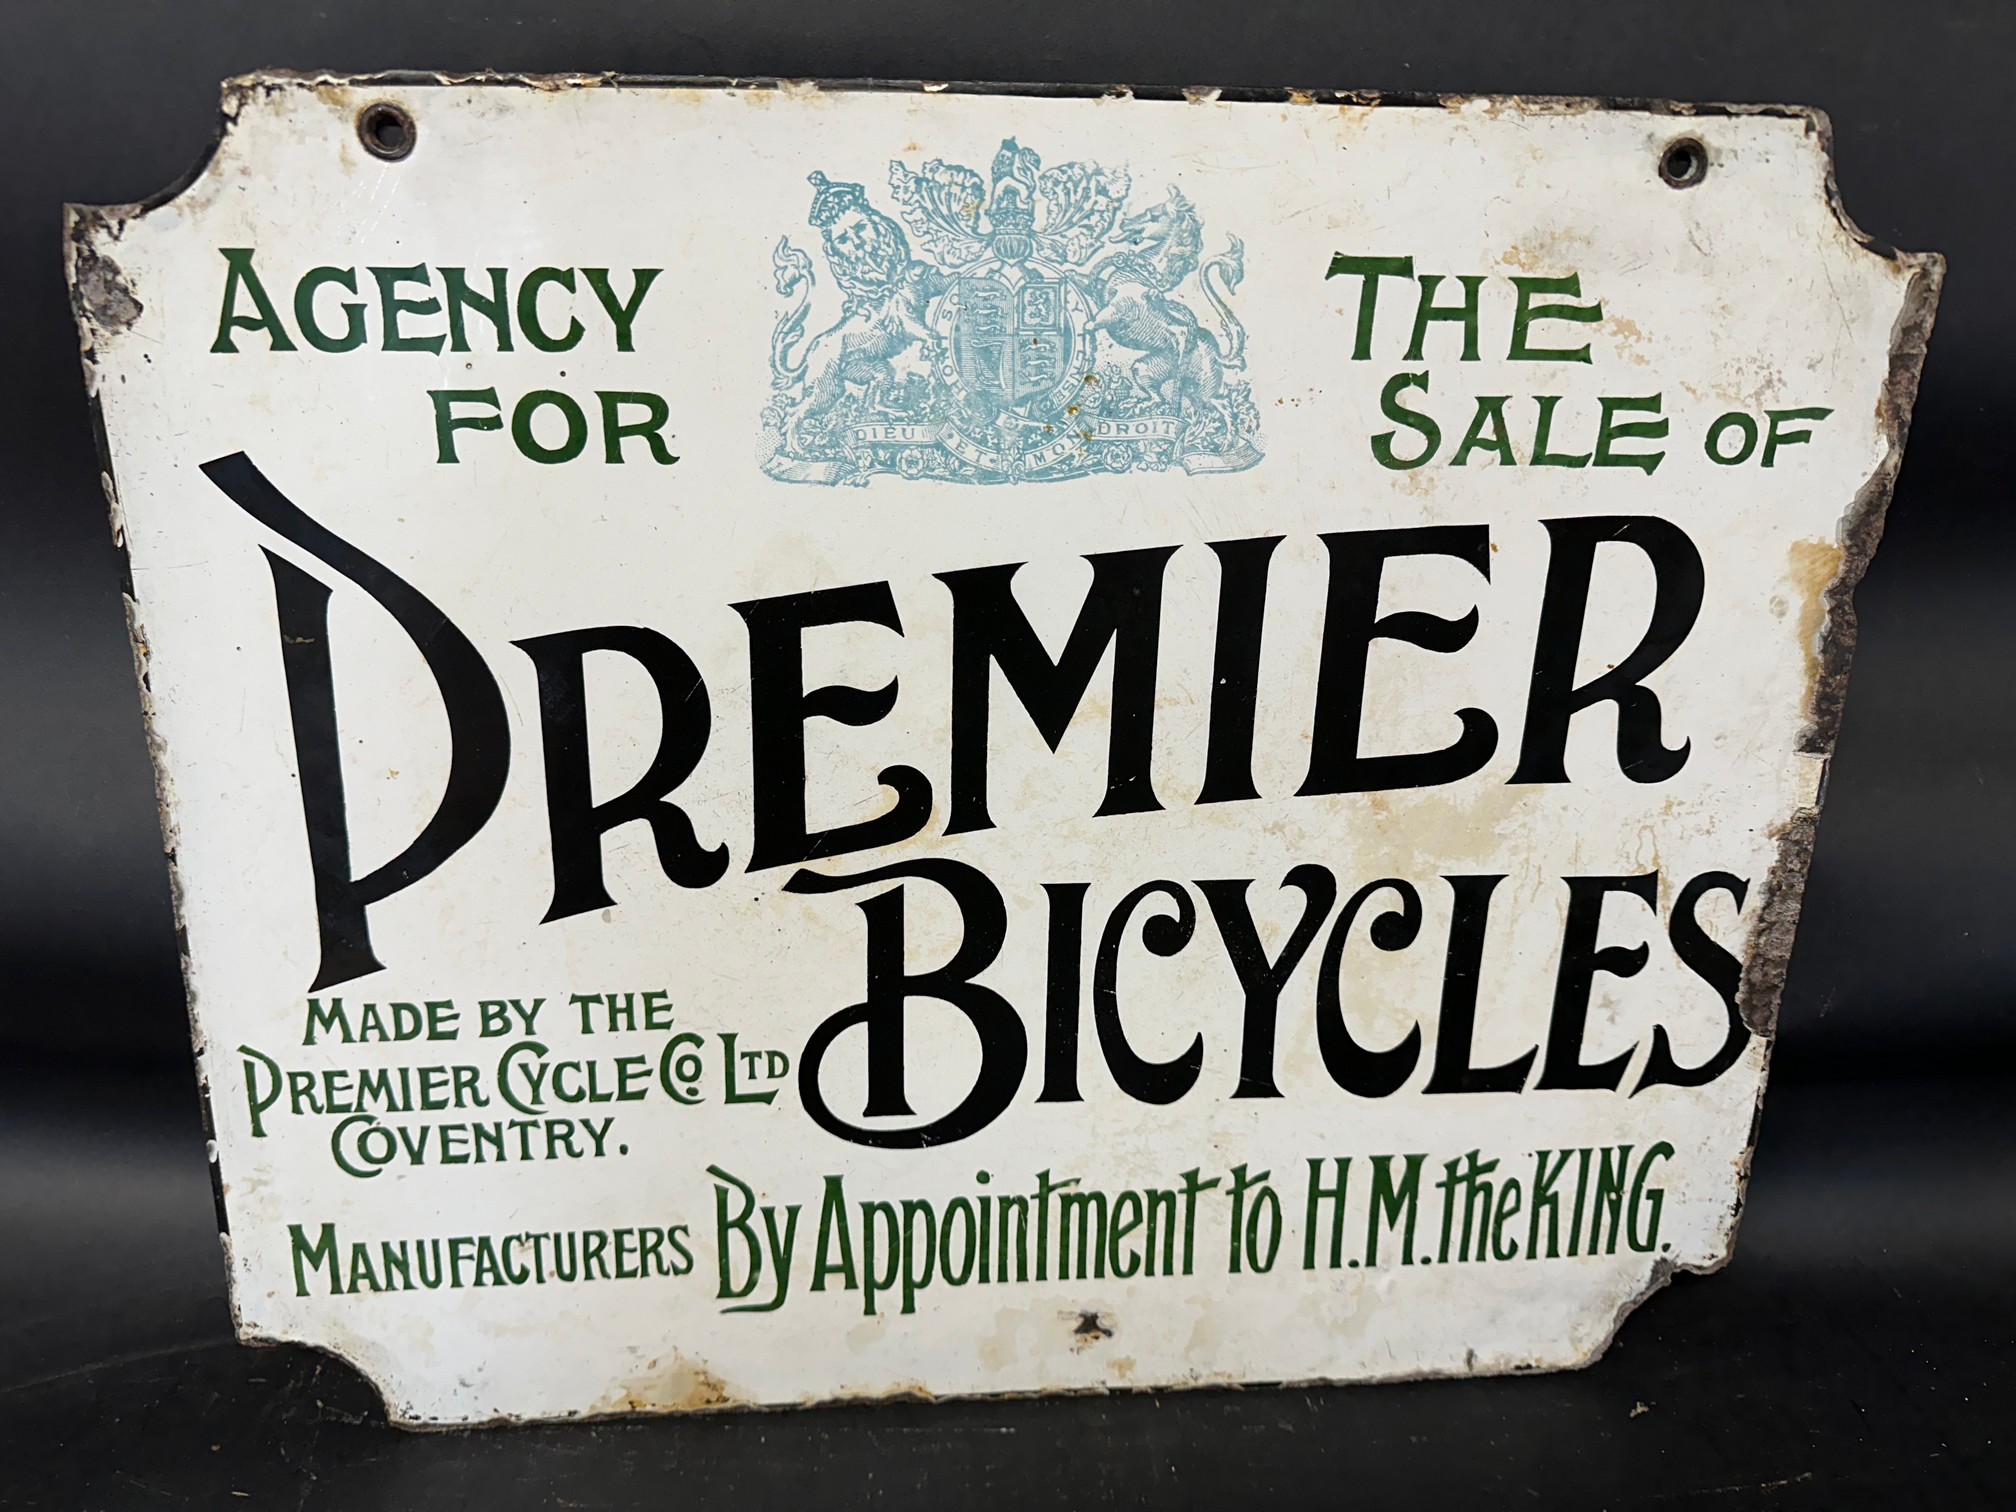 A Premier Bicycles double sided enamel advertising sign by the Premier Cycle Co. Ltd. Coventry, - Image 2 of 2